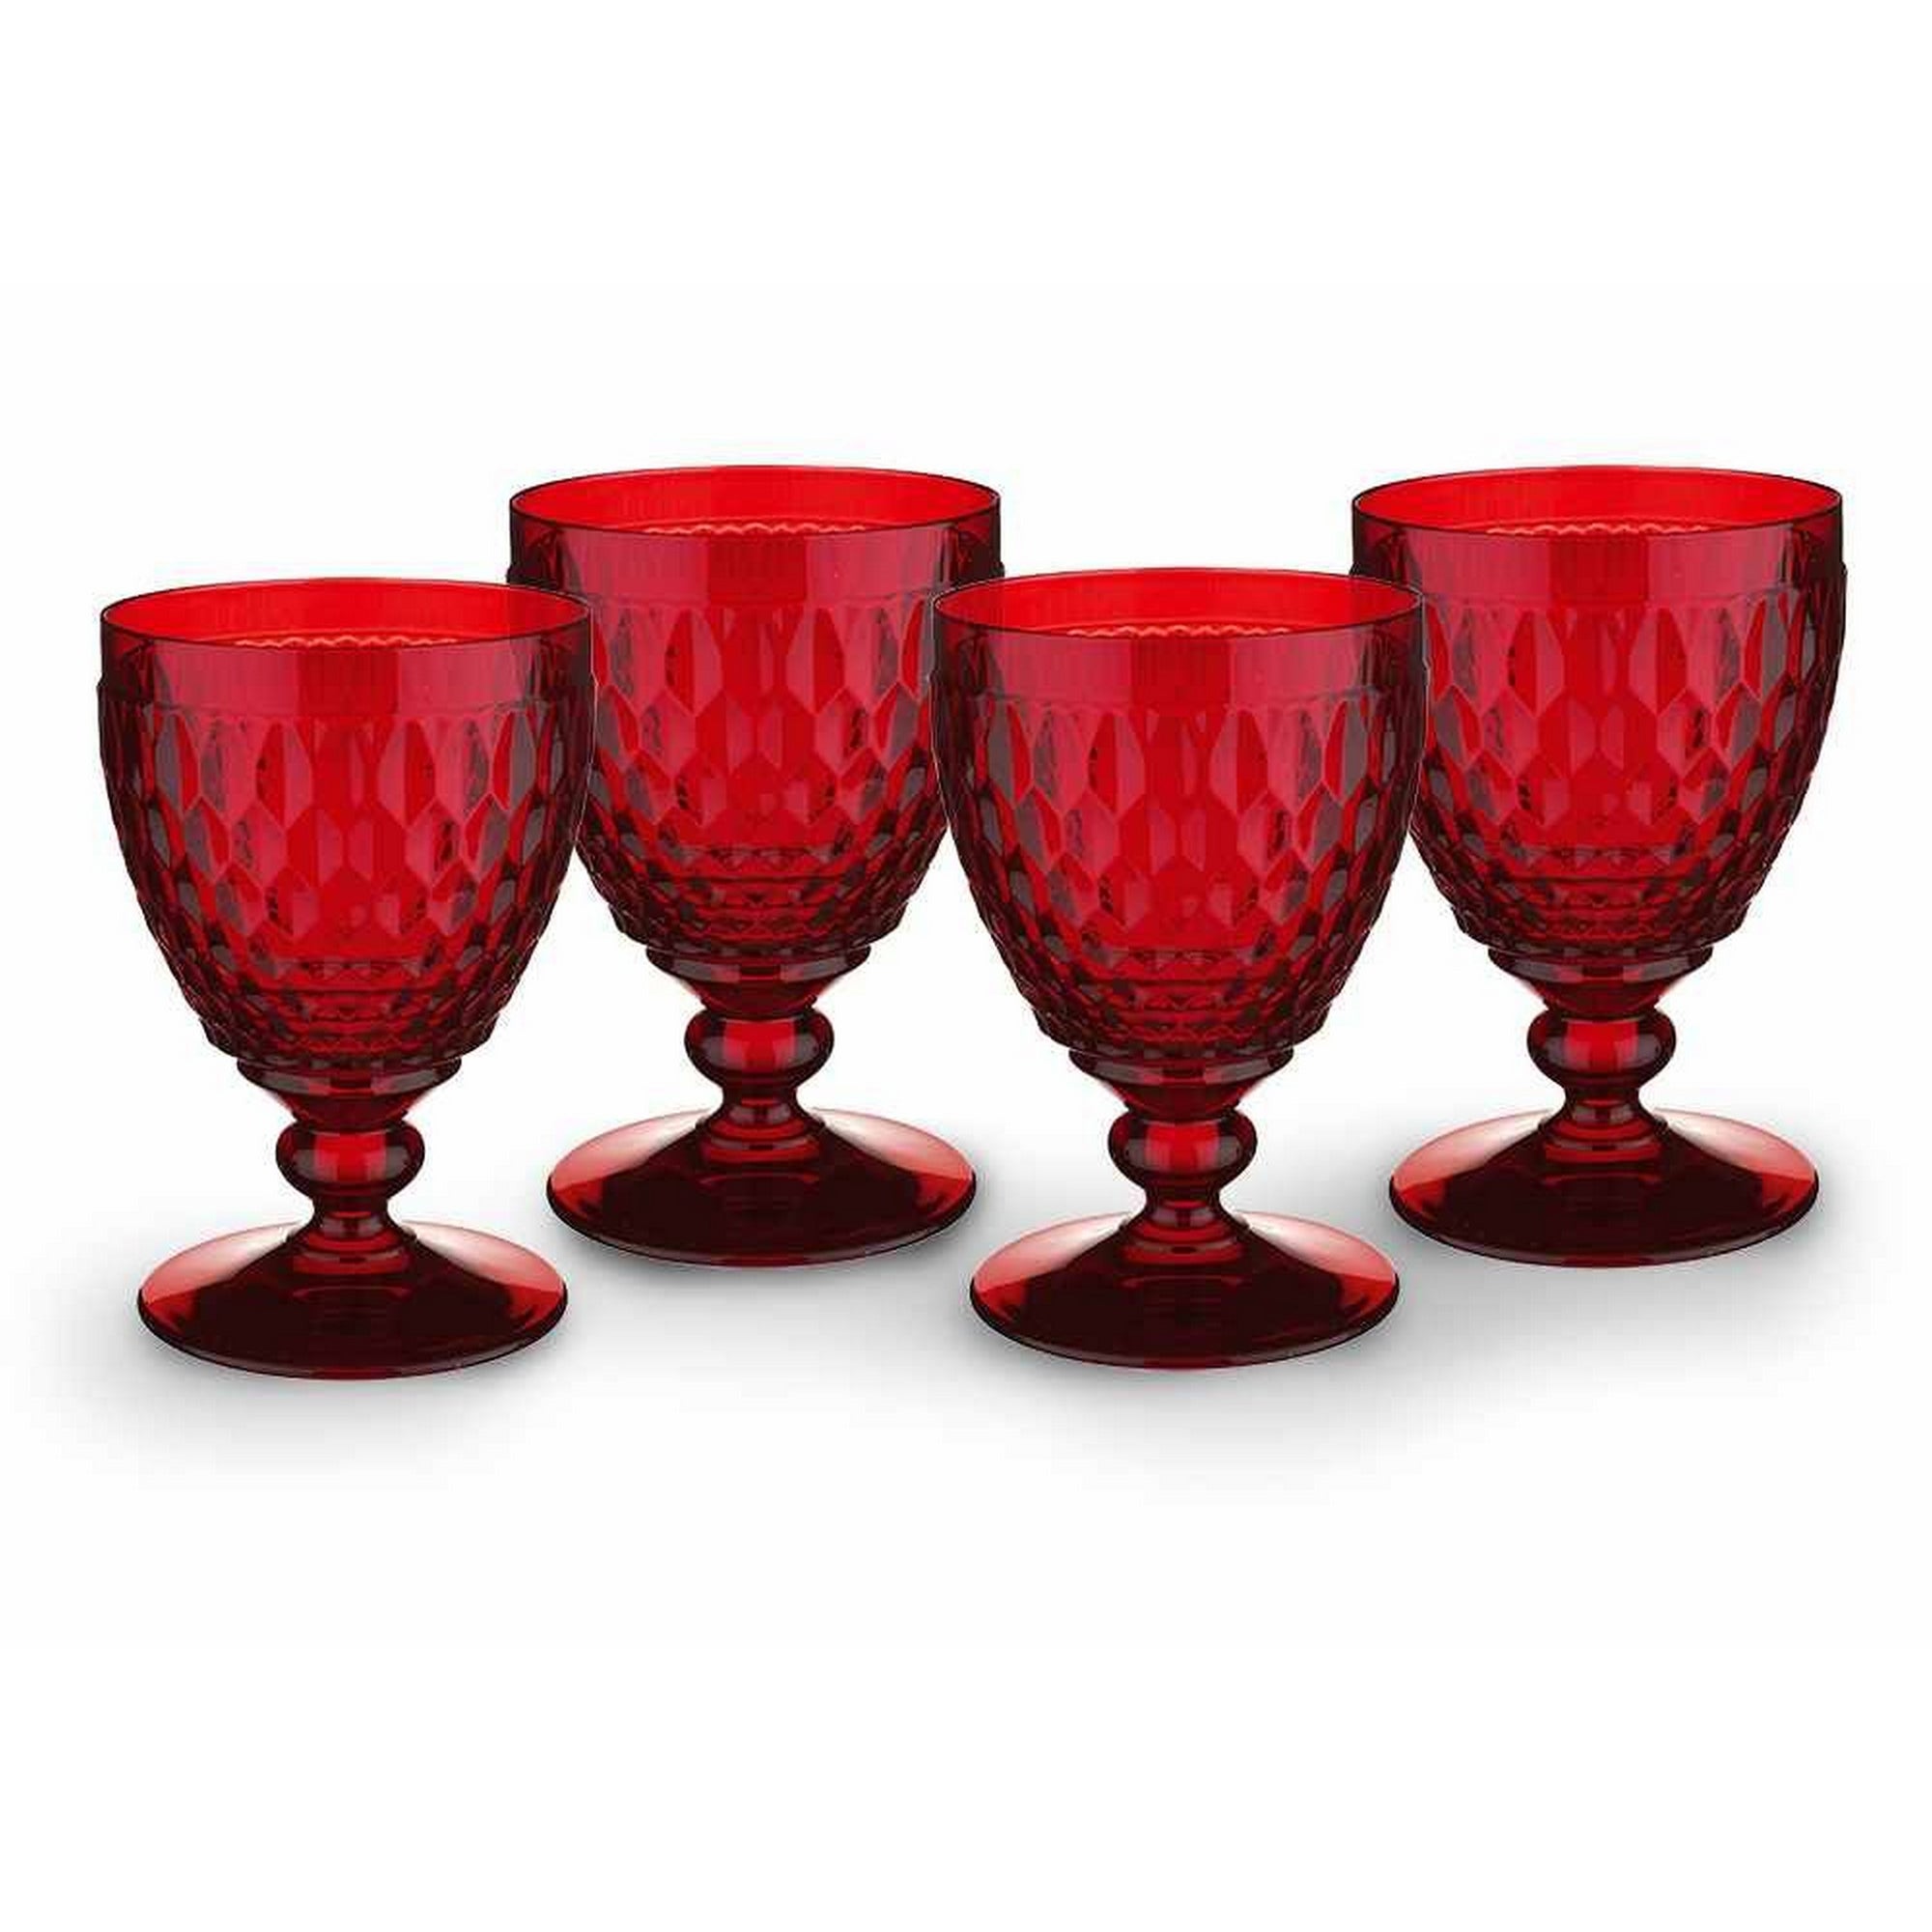 Villeroy & Boch Boston Colored Water Goblet Glasses, Set of 4, Red